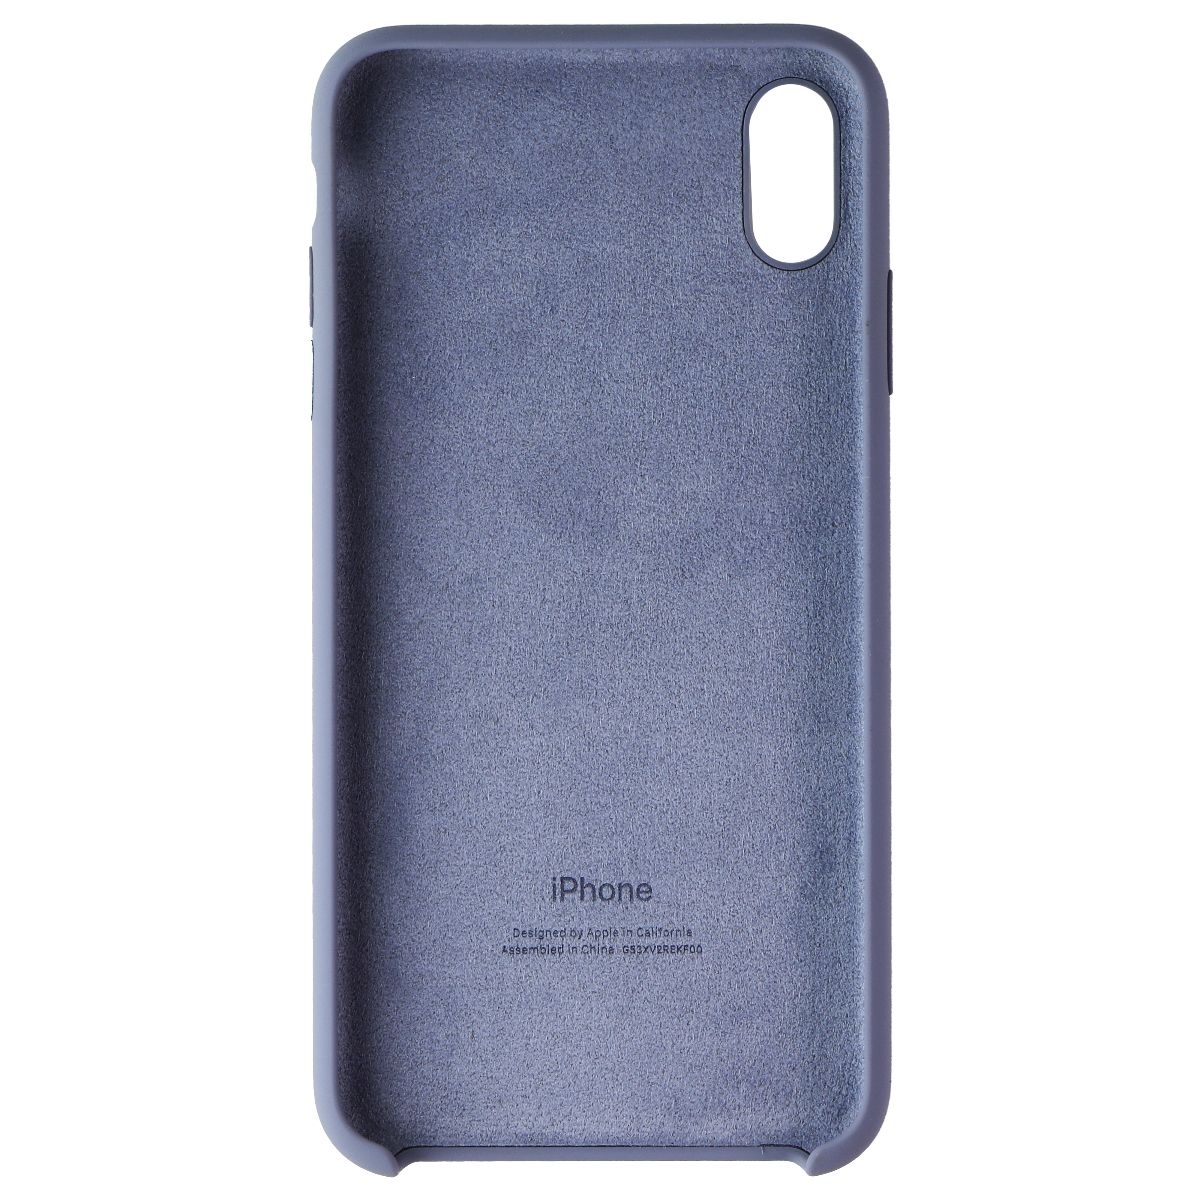 Apple Official Silicone Series Case For Apple IPhone Xs Max - Lavender Gray (Refurbished)